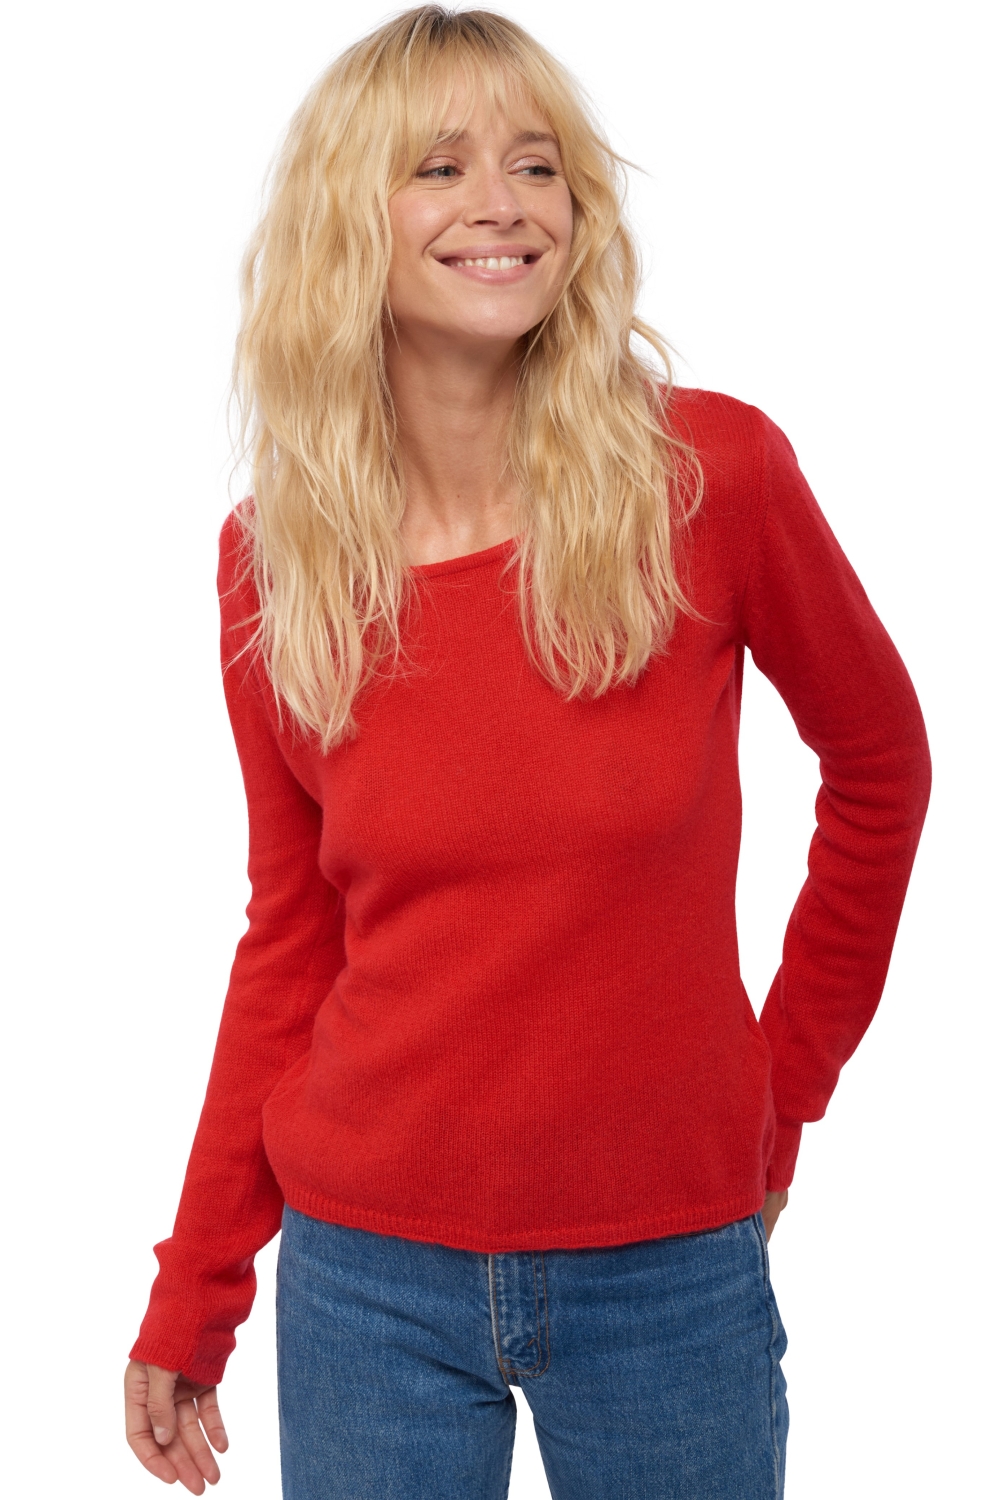 Cashmere ladies basic sweaters at low prices caleen rouge m